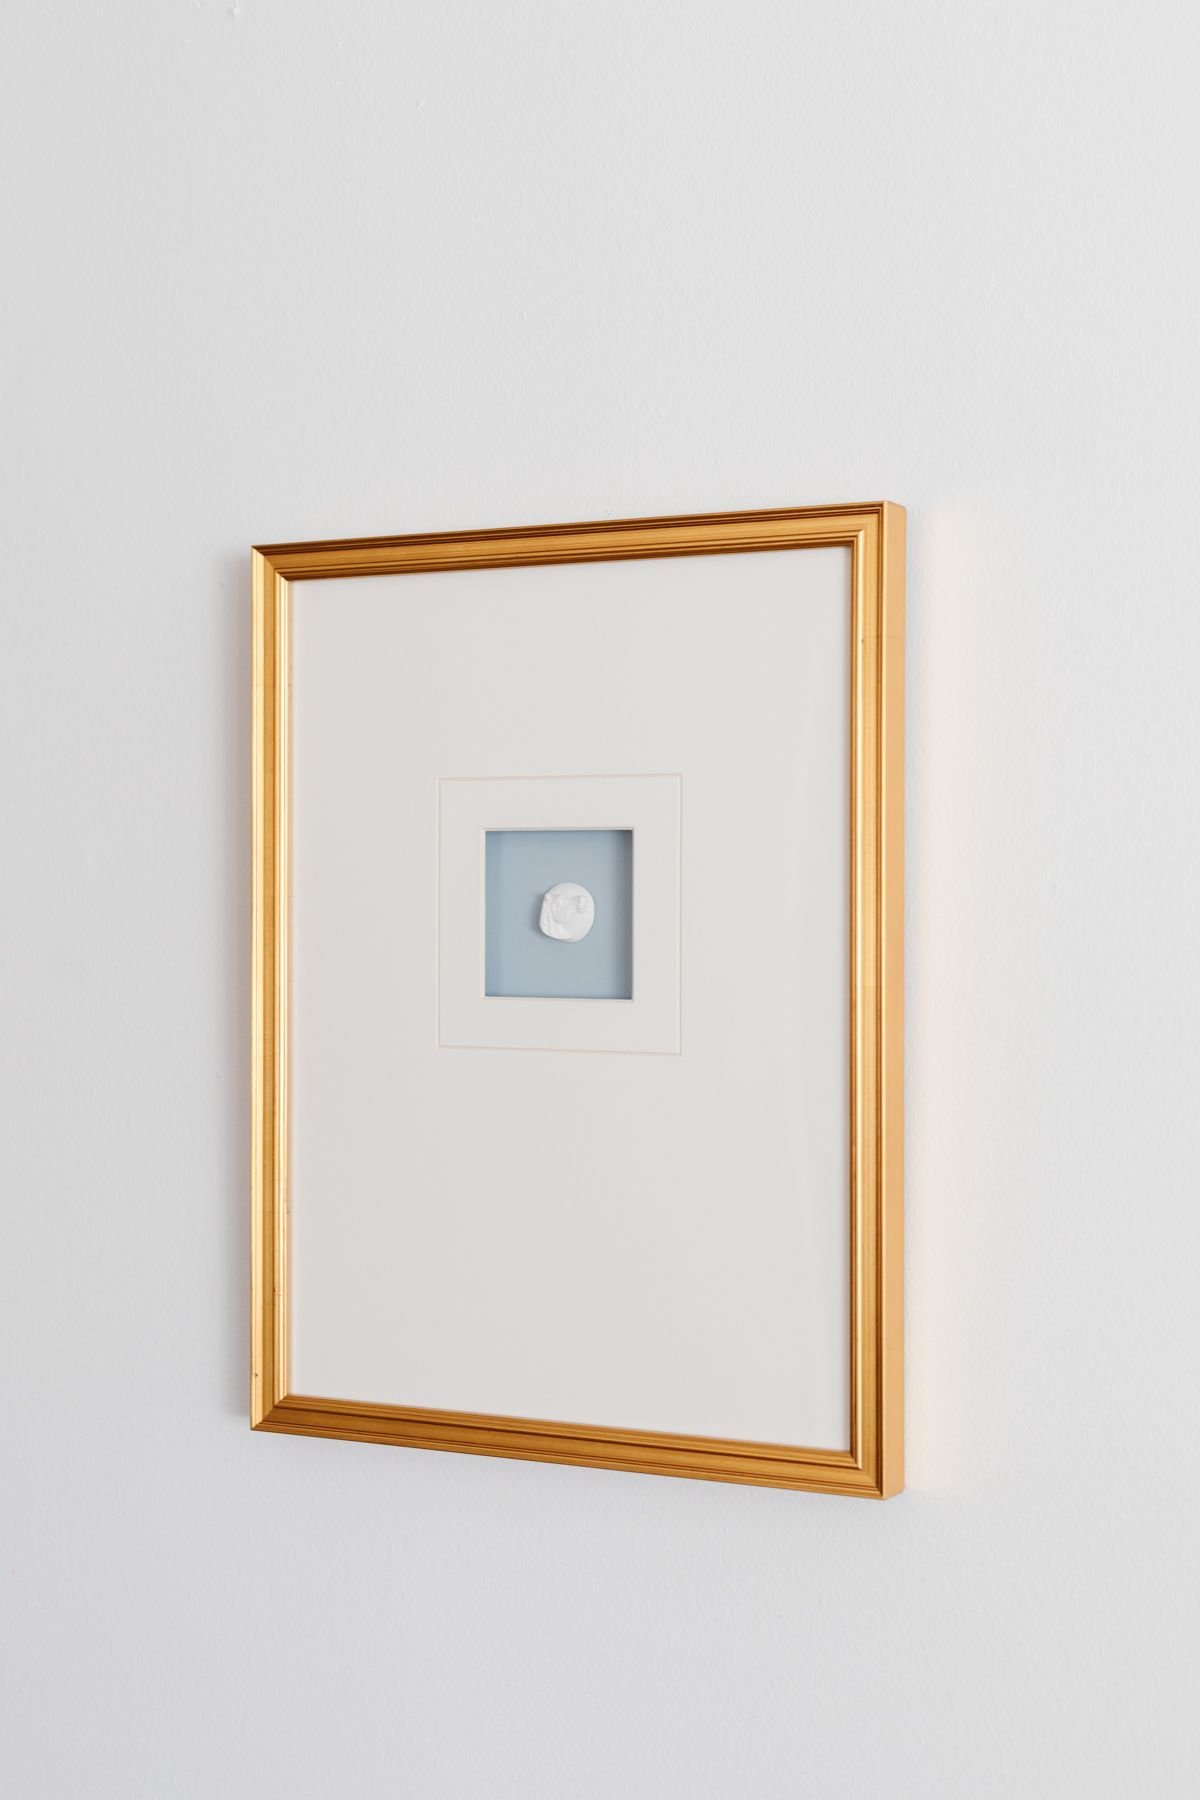 An intaglio art piece, framed with white matting and a gold frame.